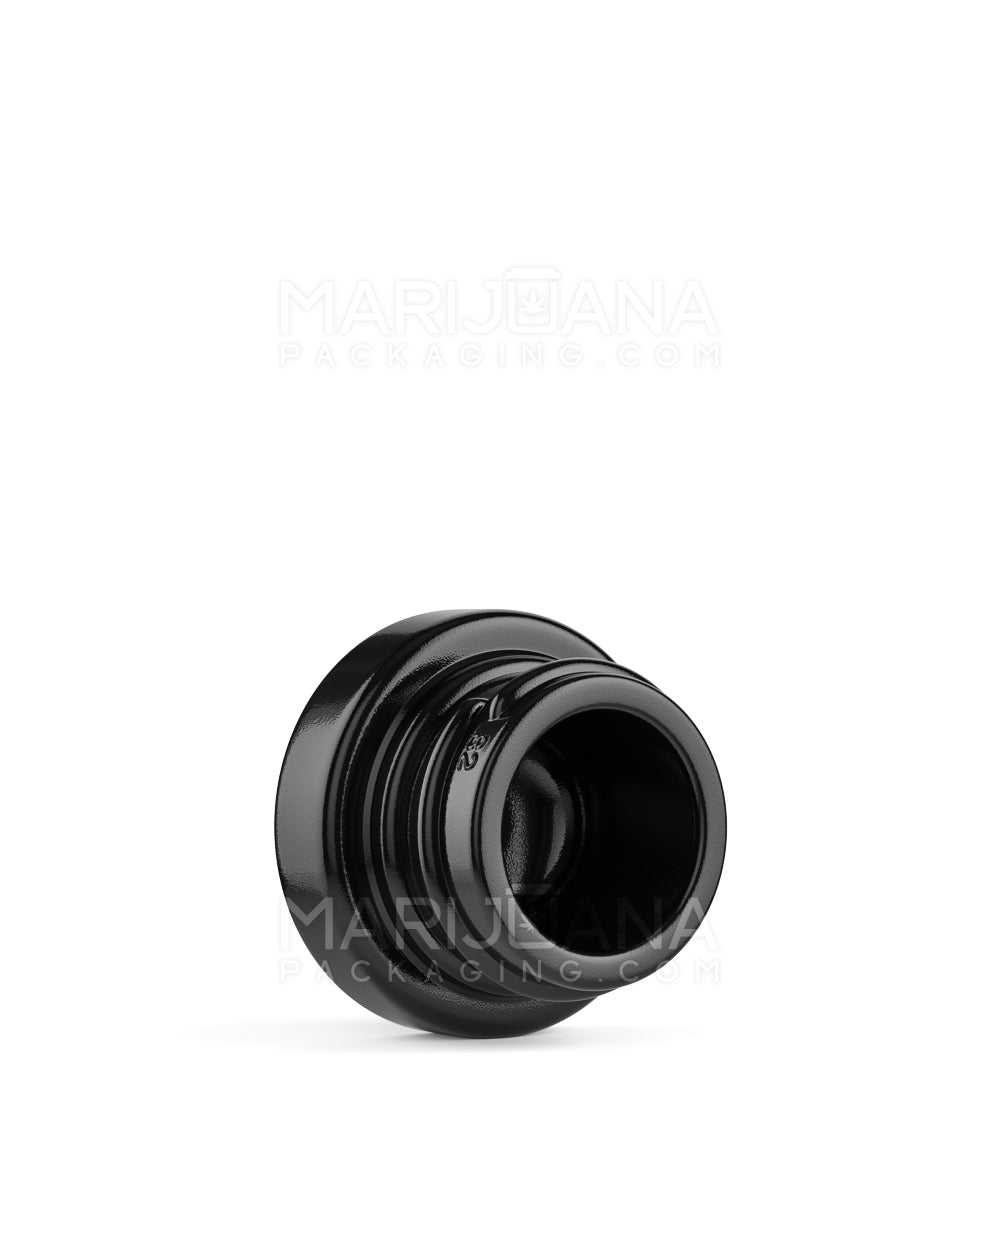 Black Glass Concentrate Containers | 28mm - 5mL - 480 Count